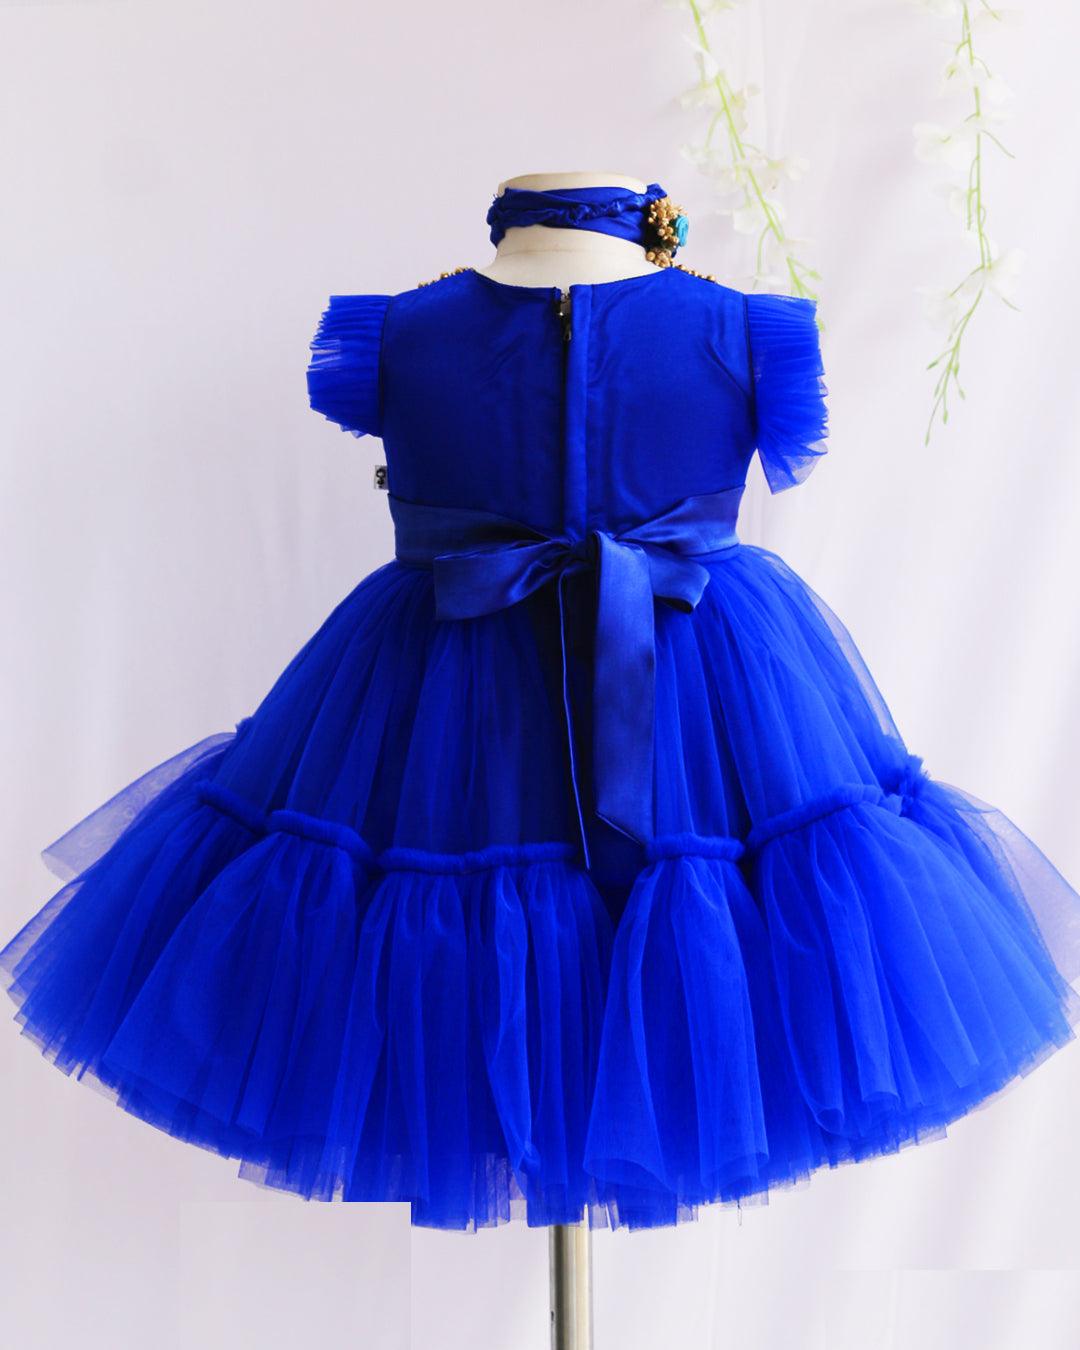 Royalblue Shade Handwork Flower Frock
Material:  Royalblue shade mono nylon net fabric with premium glossy satin as lining. Inner portion is covered with premium ultra satin and white cotton lining. cen